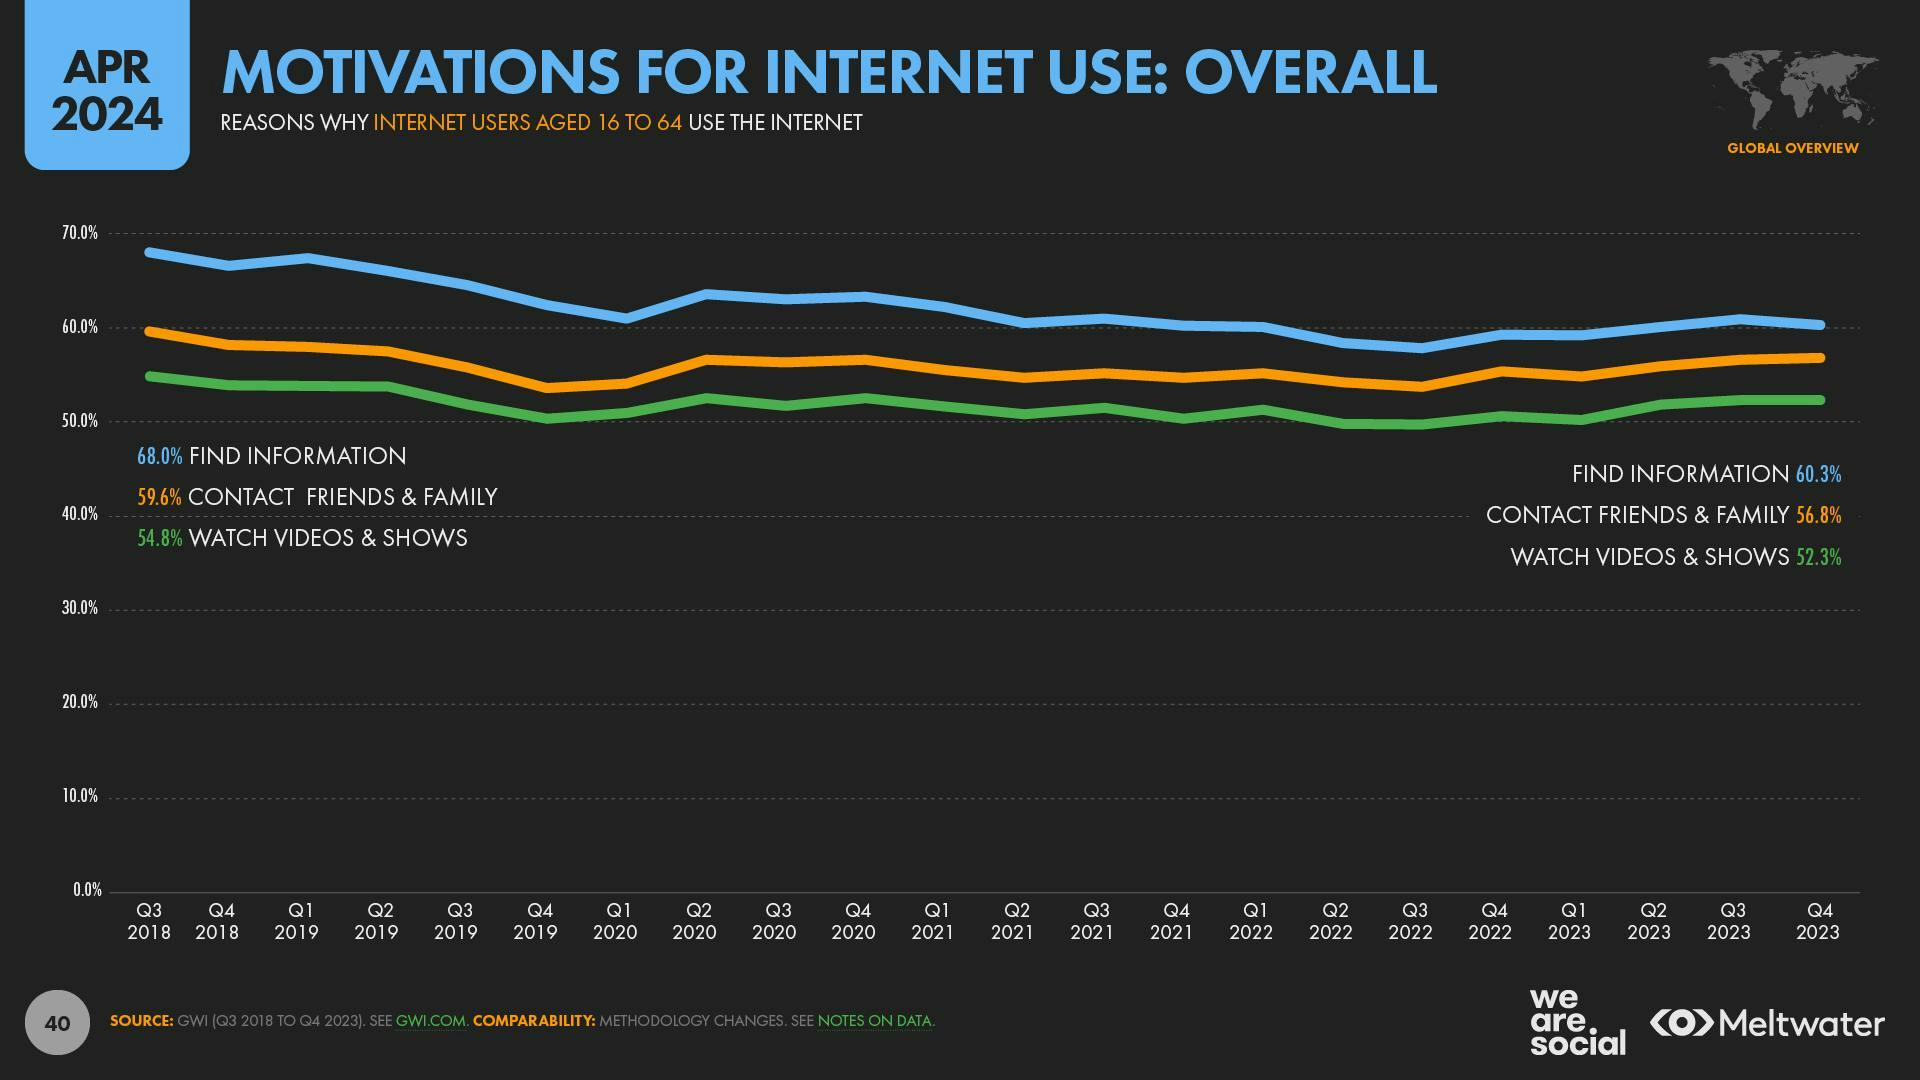 Motivations for internet use: Overall